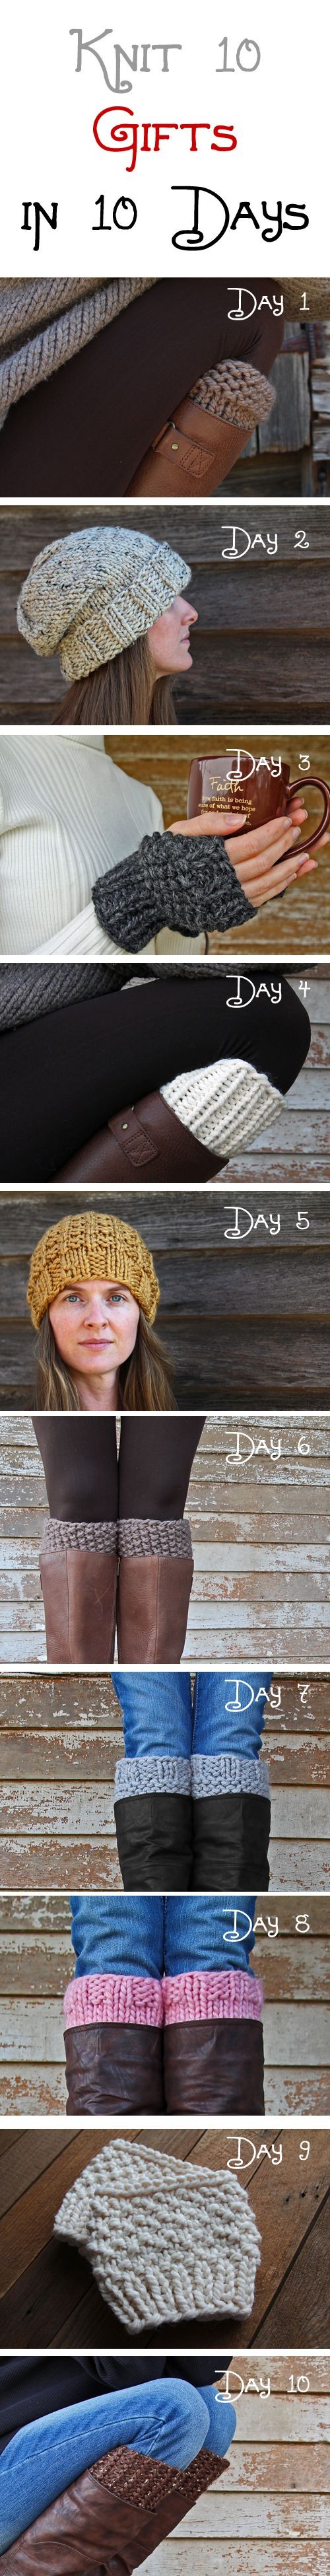 Knit 10 Gifts in 10 Days | Brome Fields - knitting...